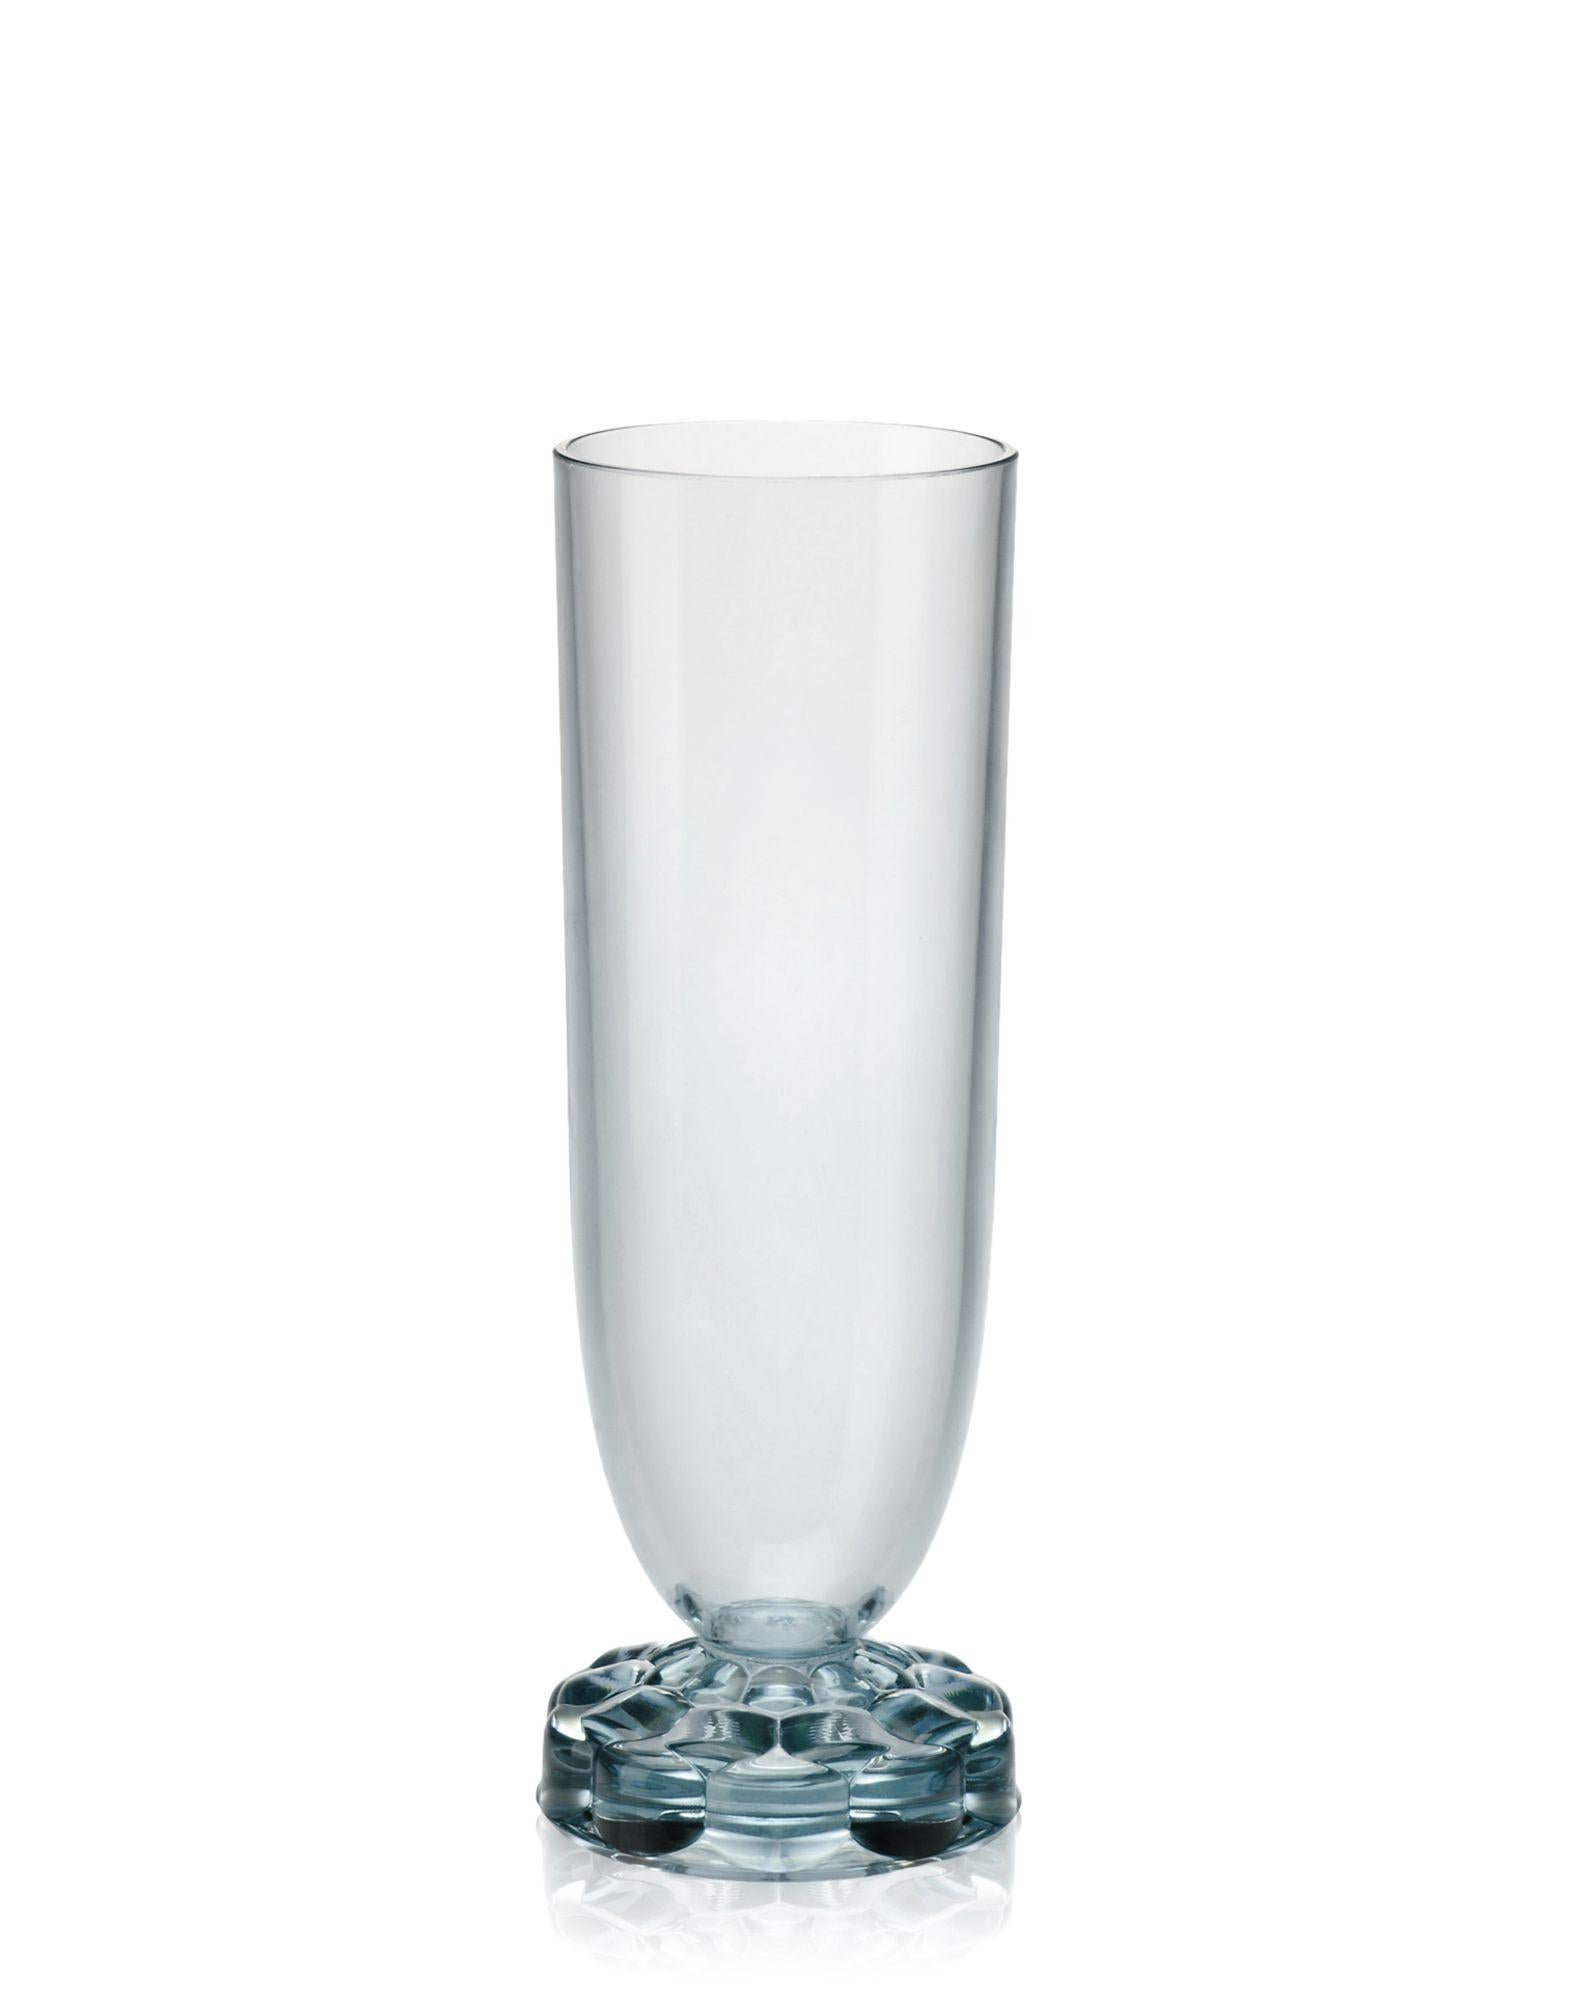 The Jellies family tableware line has been expanded to include new items designed especially for the Christmas holidays and for ringing in the New Year, the Jellies champagne flute.

Dimensions: Height 6.75 in.; diameter 2.13 in.; unit weight: